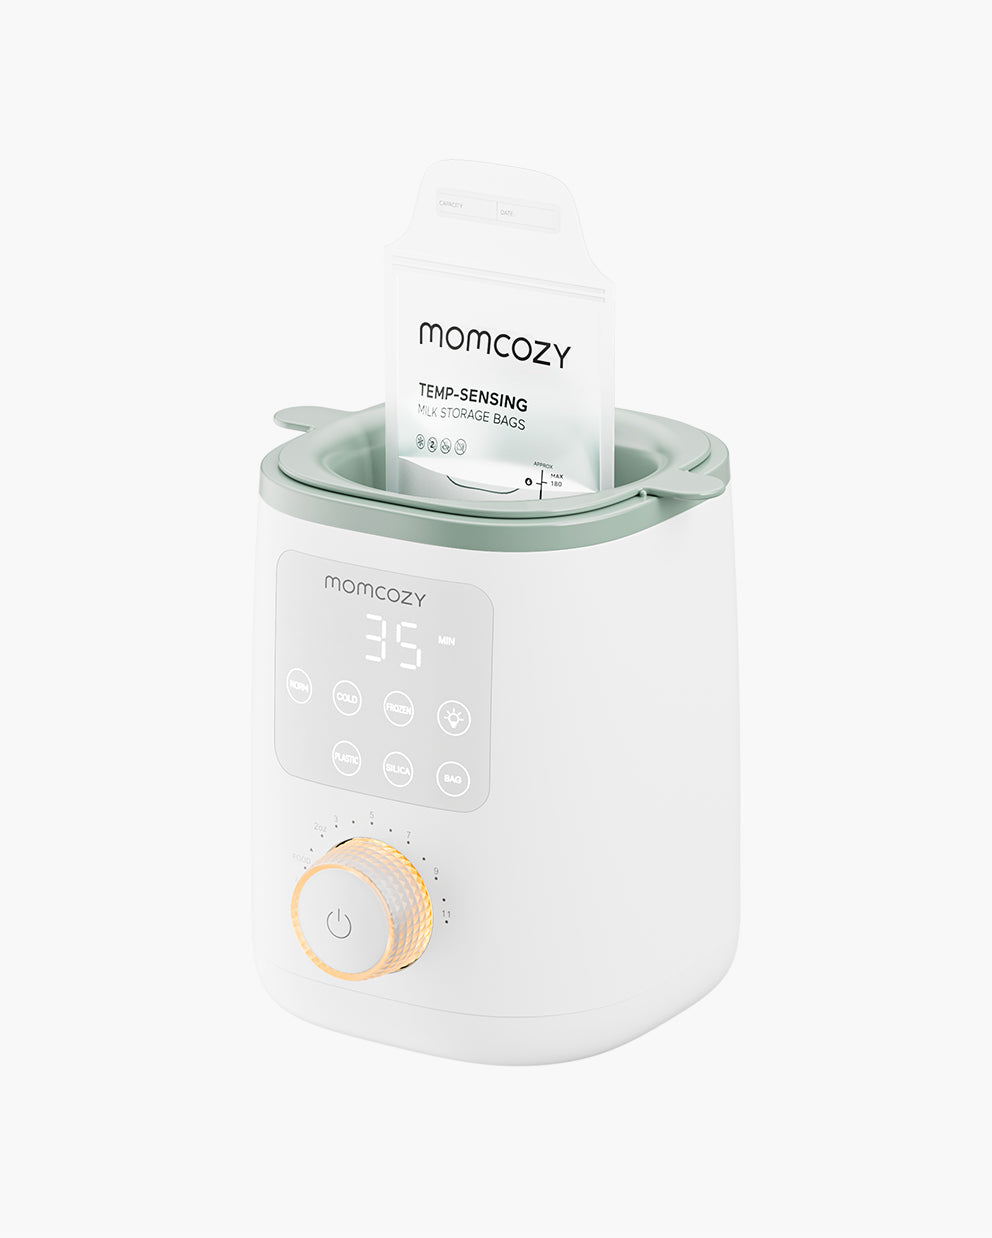 I have been using this bottle warmer everyday got a month and I love i, Momcozy